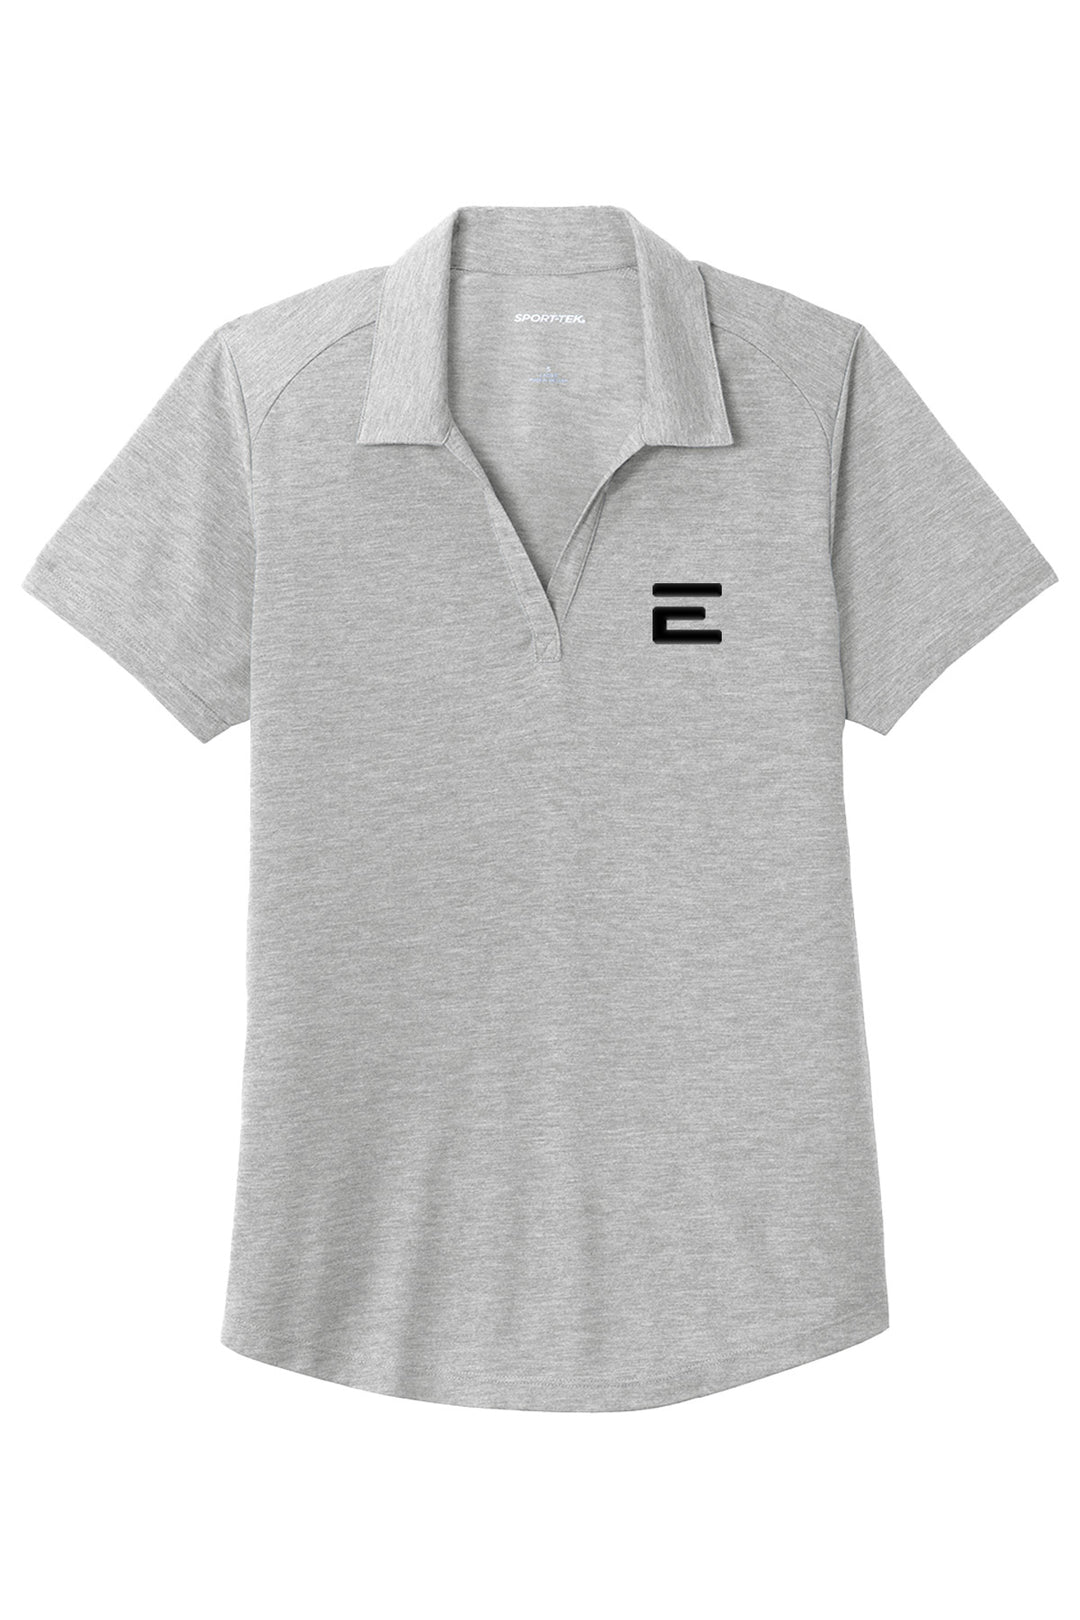 Ladies PosiCharge Tri-Blend Wicking Polo